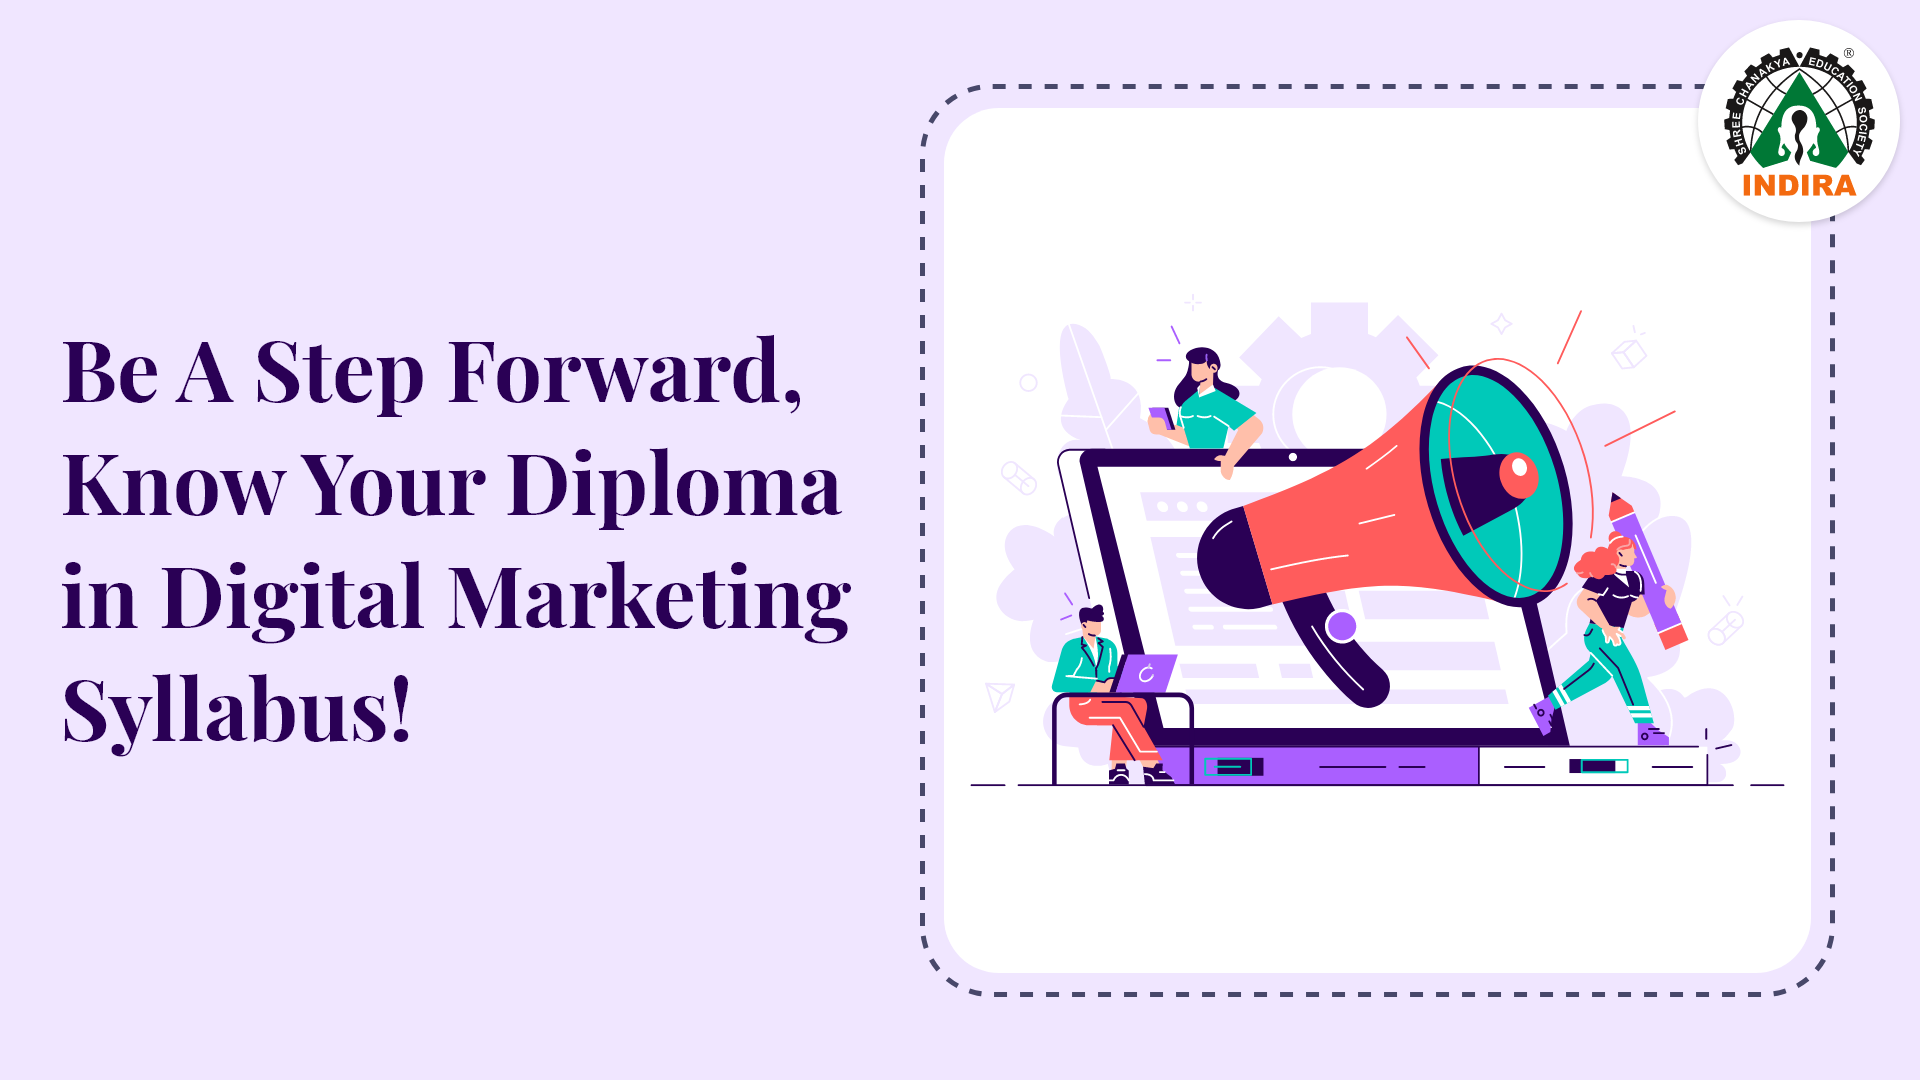 Be A Step Forward, Know Your Diploma in Digital Marketing Syllabus